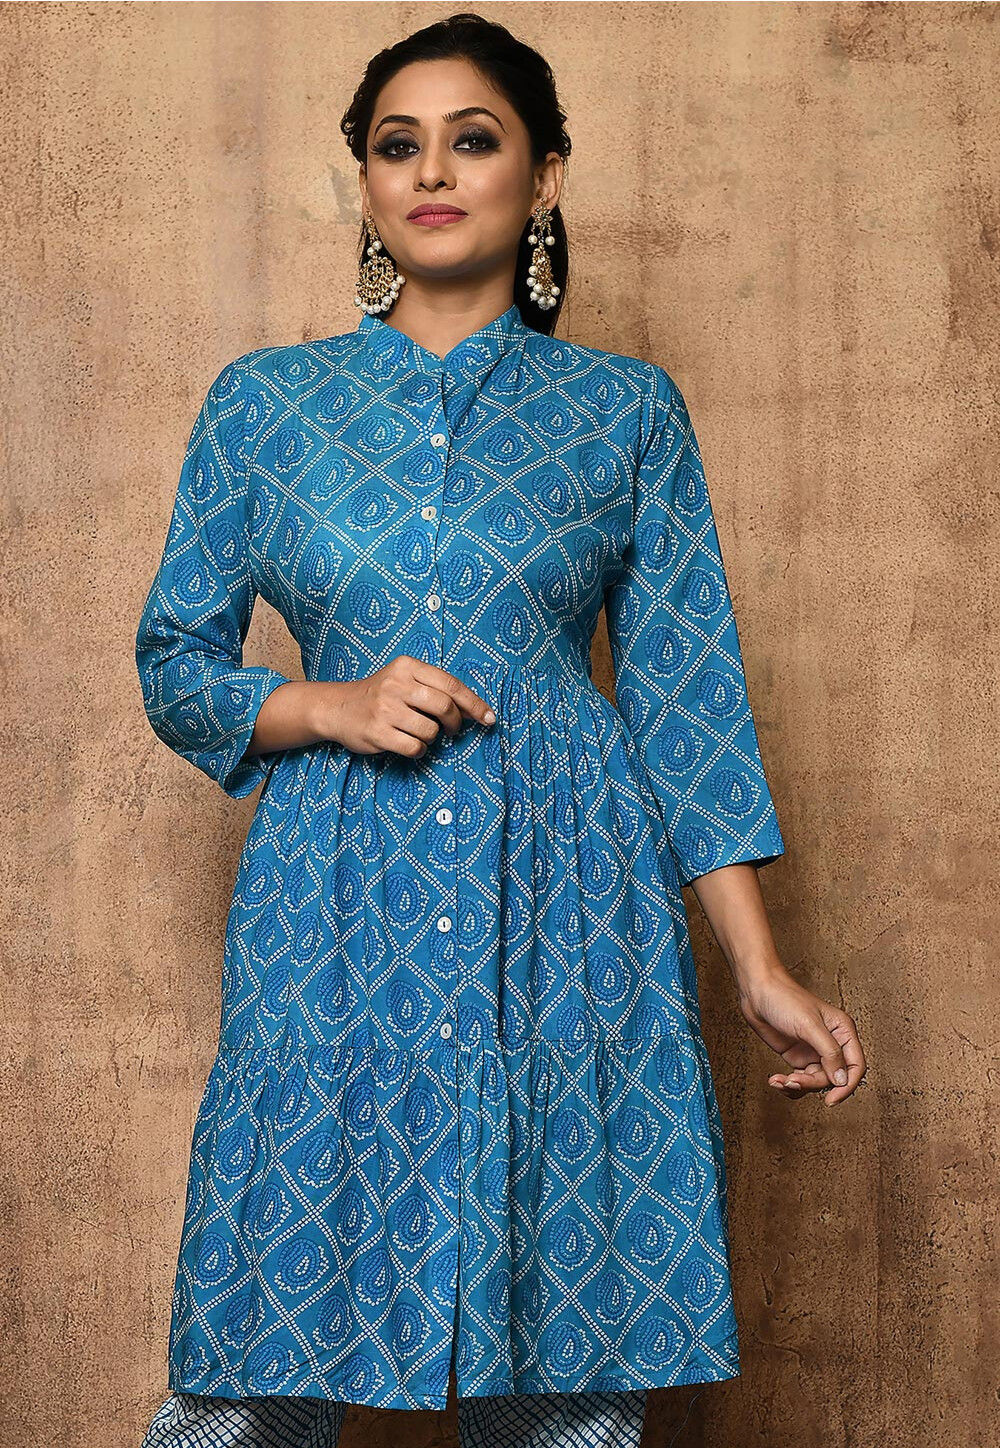 Discover more than 206 maternity front open kurtis latest